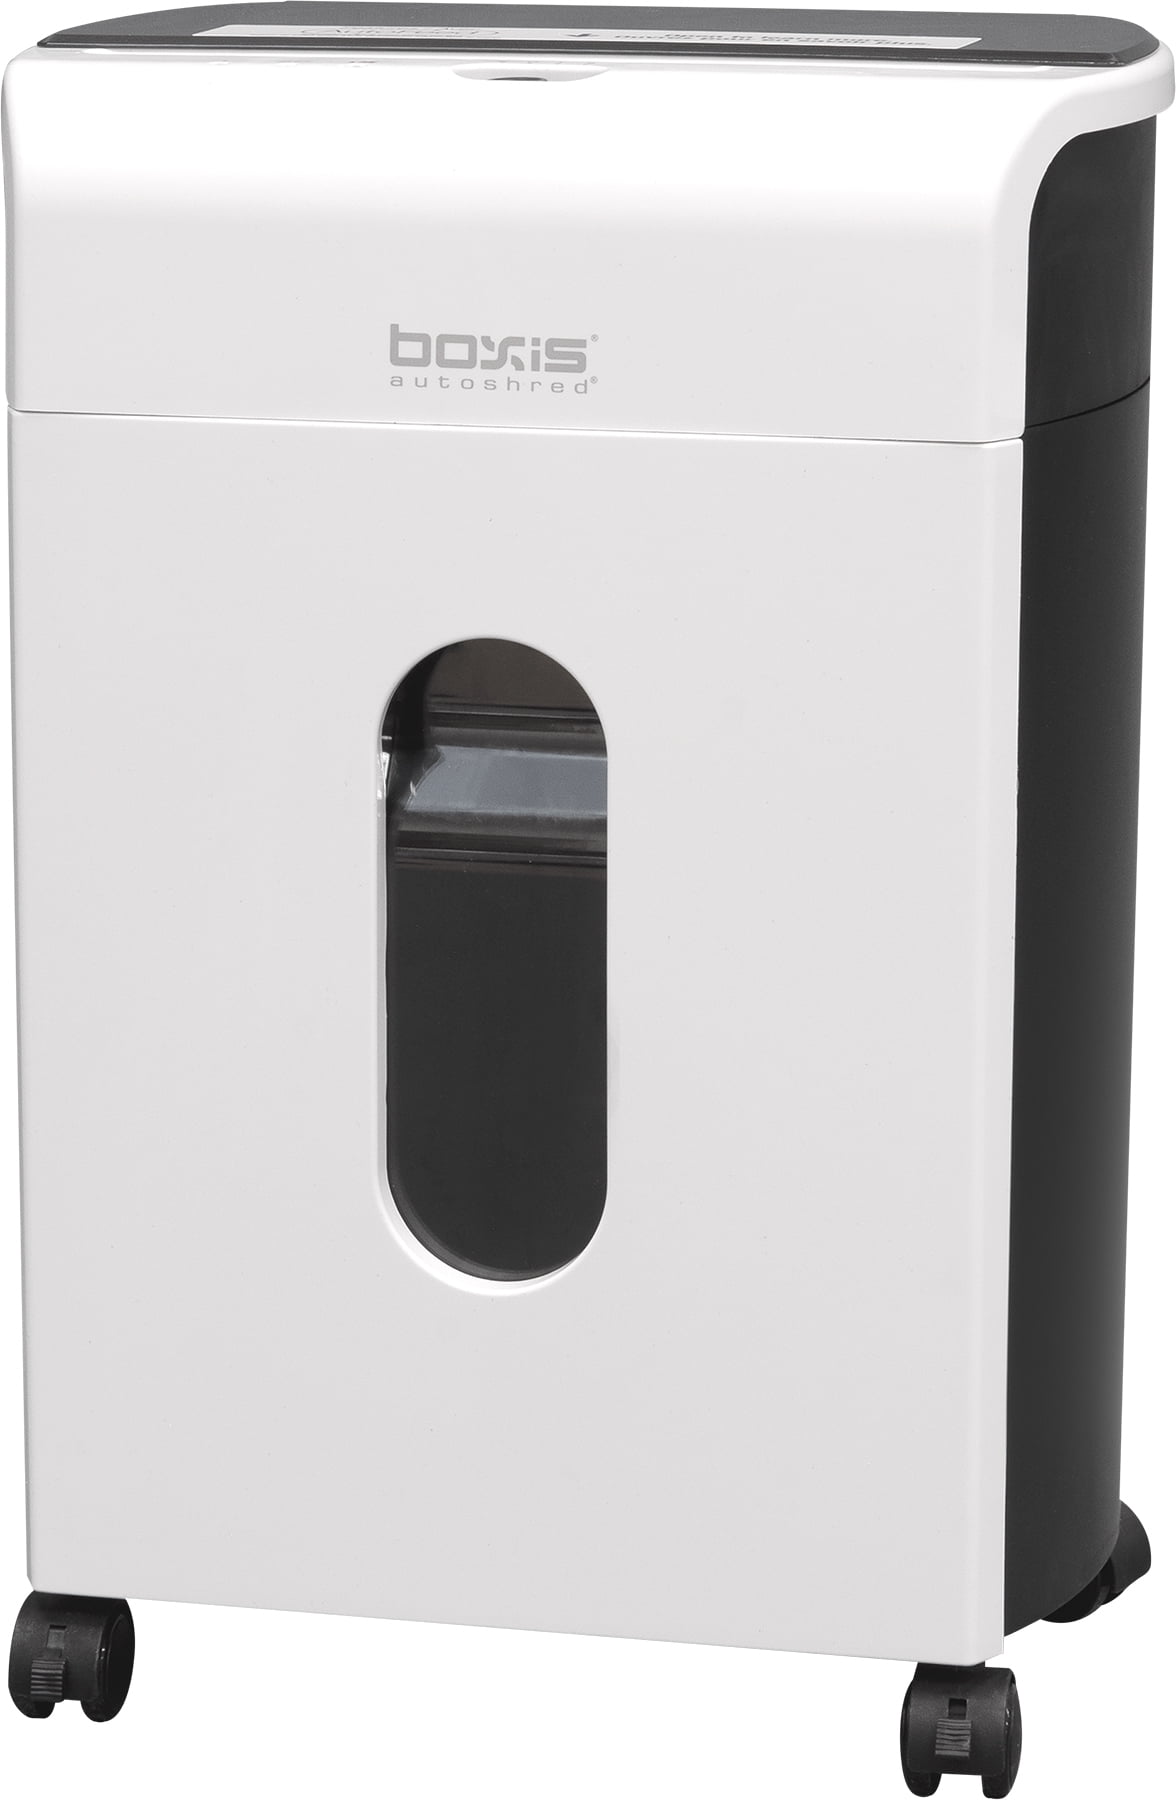 Boxis® AutoShred® 60-Sheet Auto Feed Microcut Paper Shredder - White -  Includes a 12 Pack of Shredcare® Lubricant Sheets 